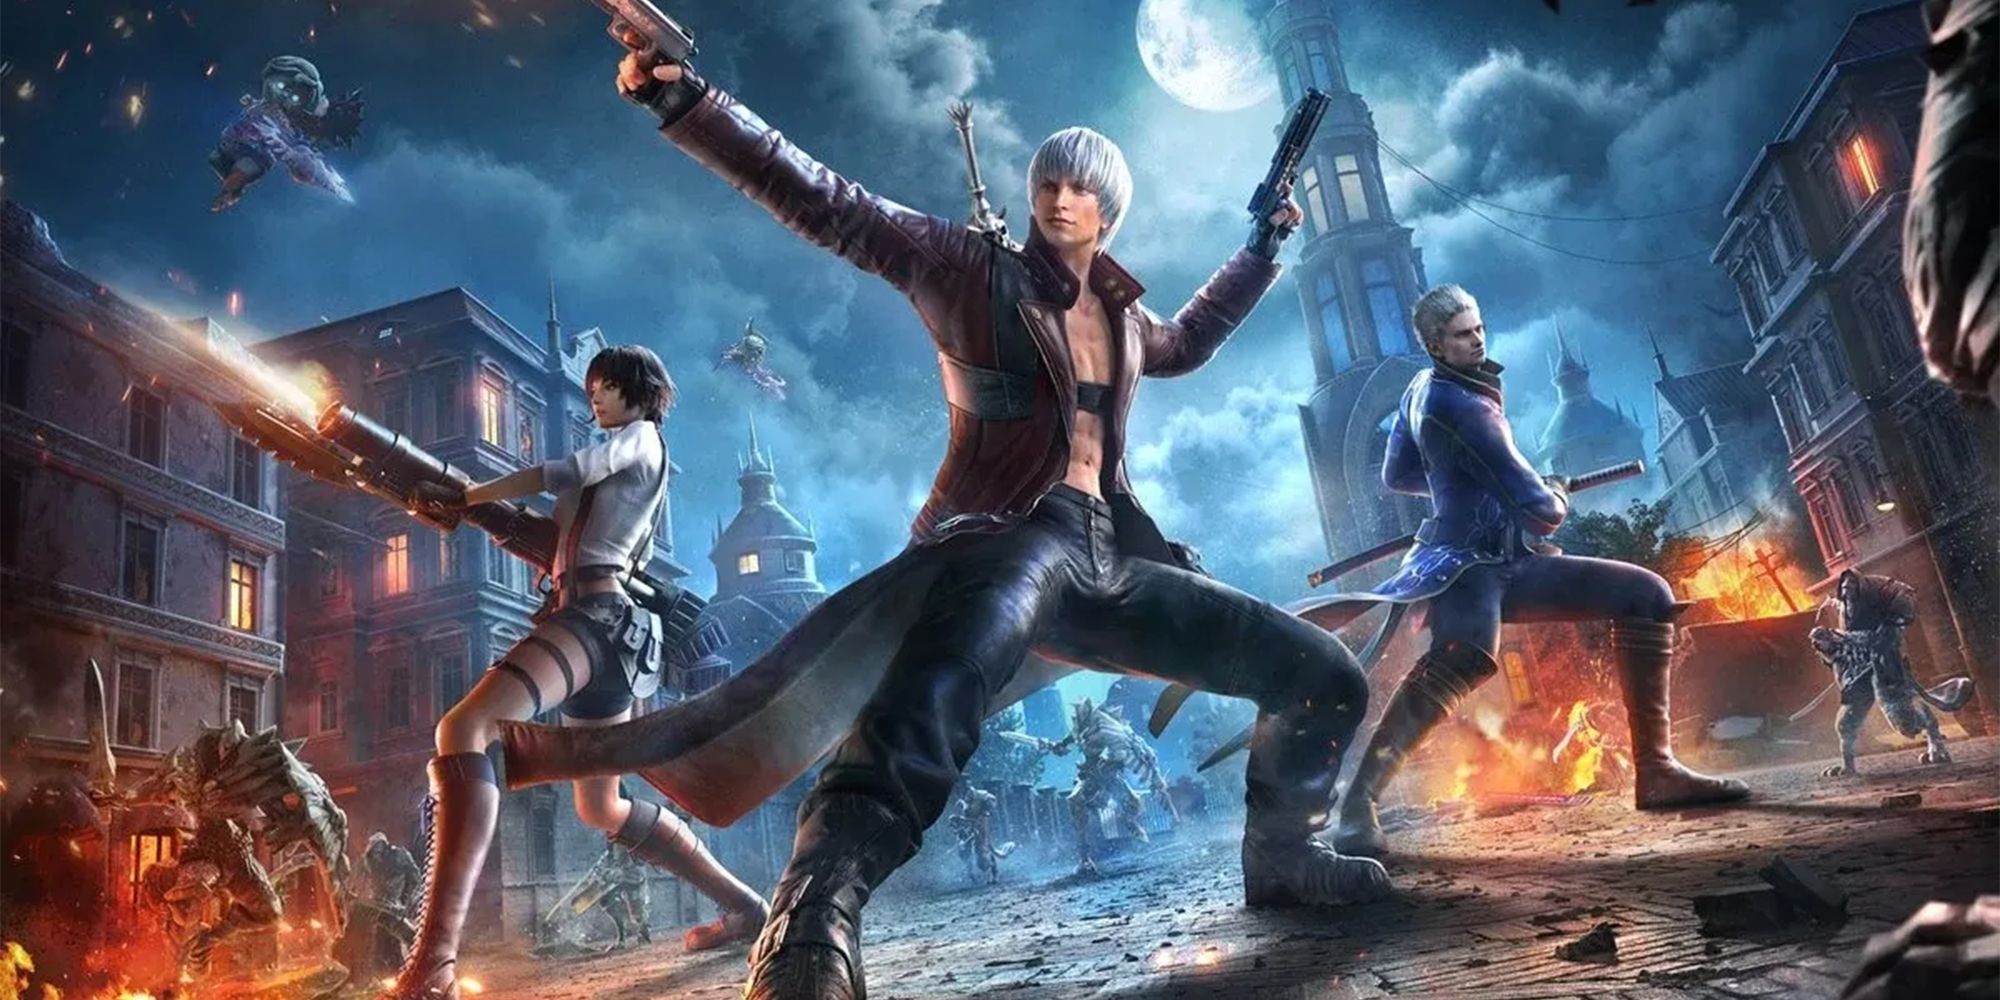 dante, lady, and vergil fighting demons in promotional art